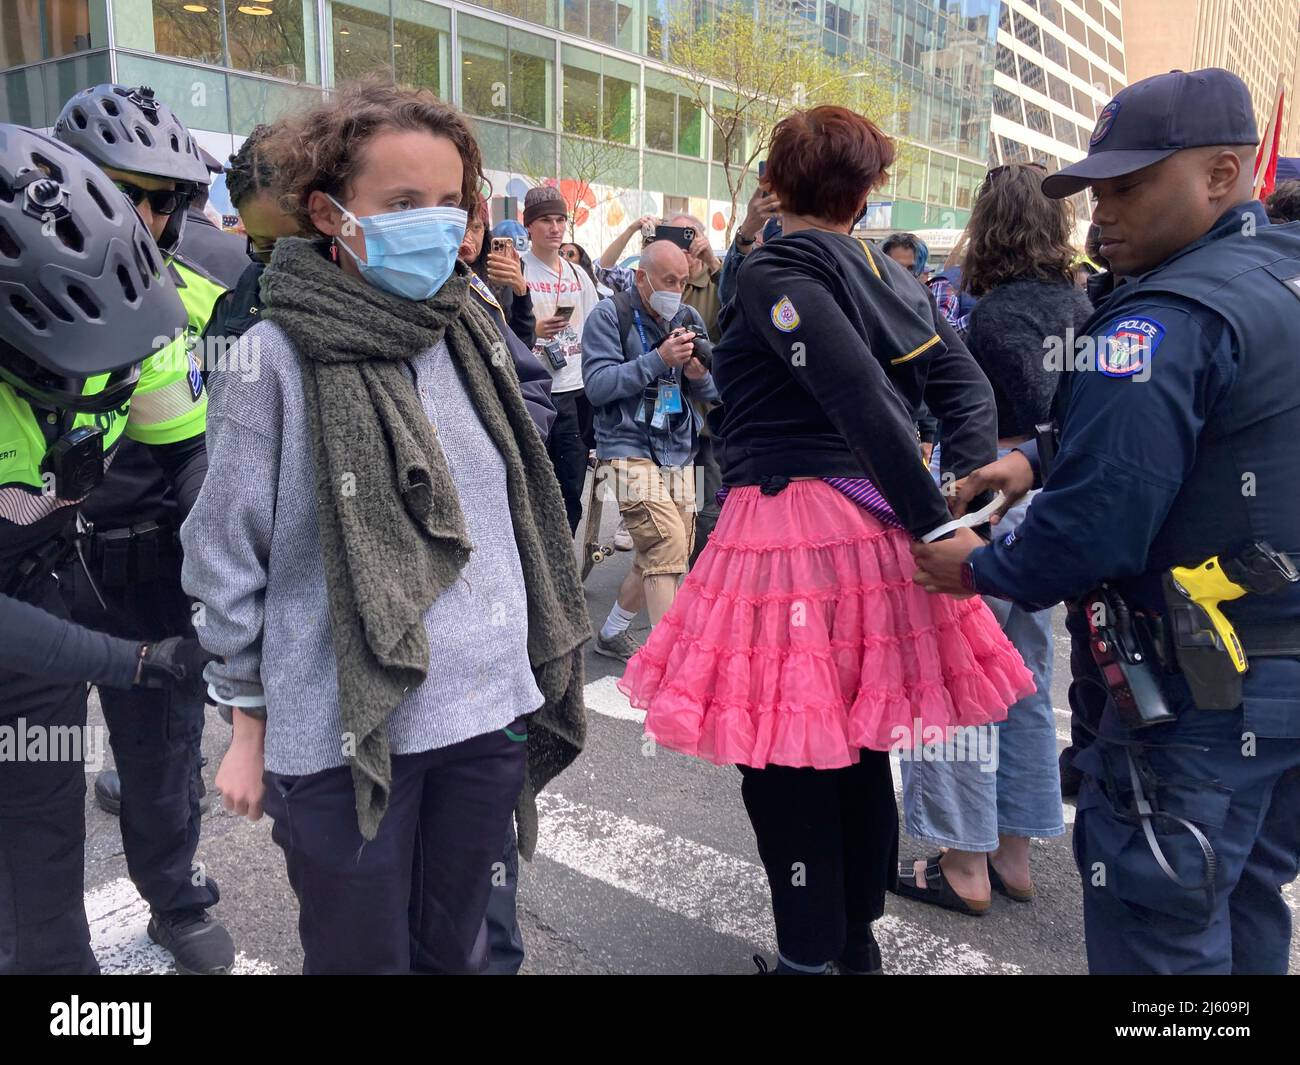 Environmental activists affiliated with Extinction Rebellion perform civil disobedience by blocking traffic on Sixth Avenue in New York on Saturday, April 23, 2022. The protest called attention to the inactivity of government to stop climate catastrophe, the protesters were subsequently arrested (© Frances M. Roberts) Stock Photo